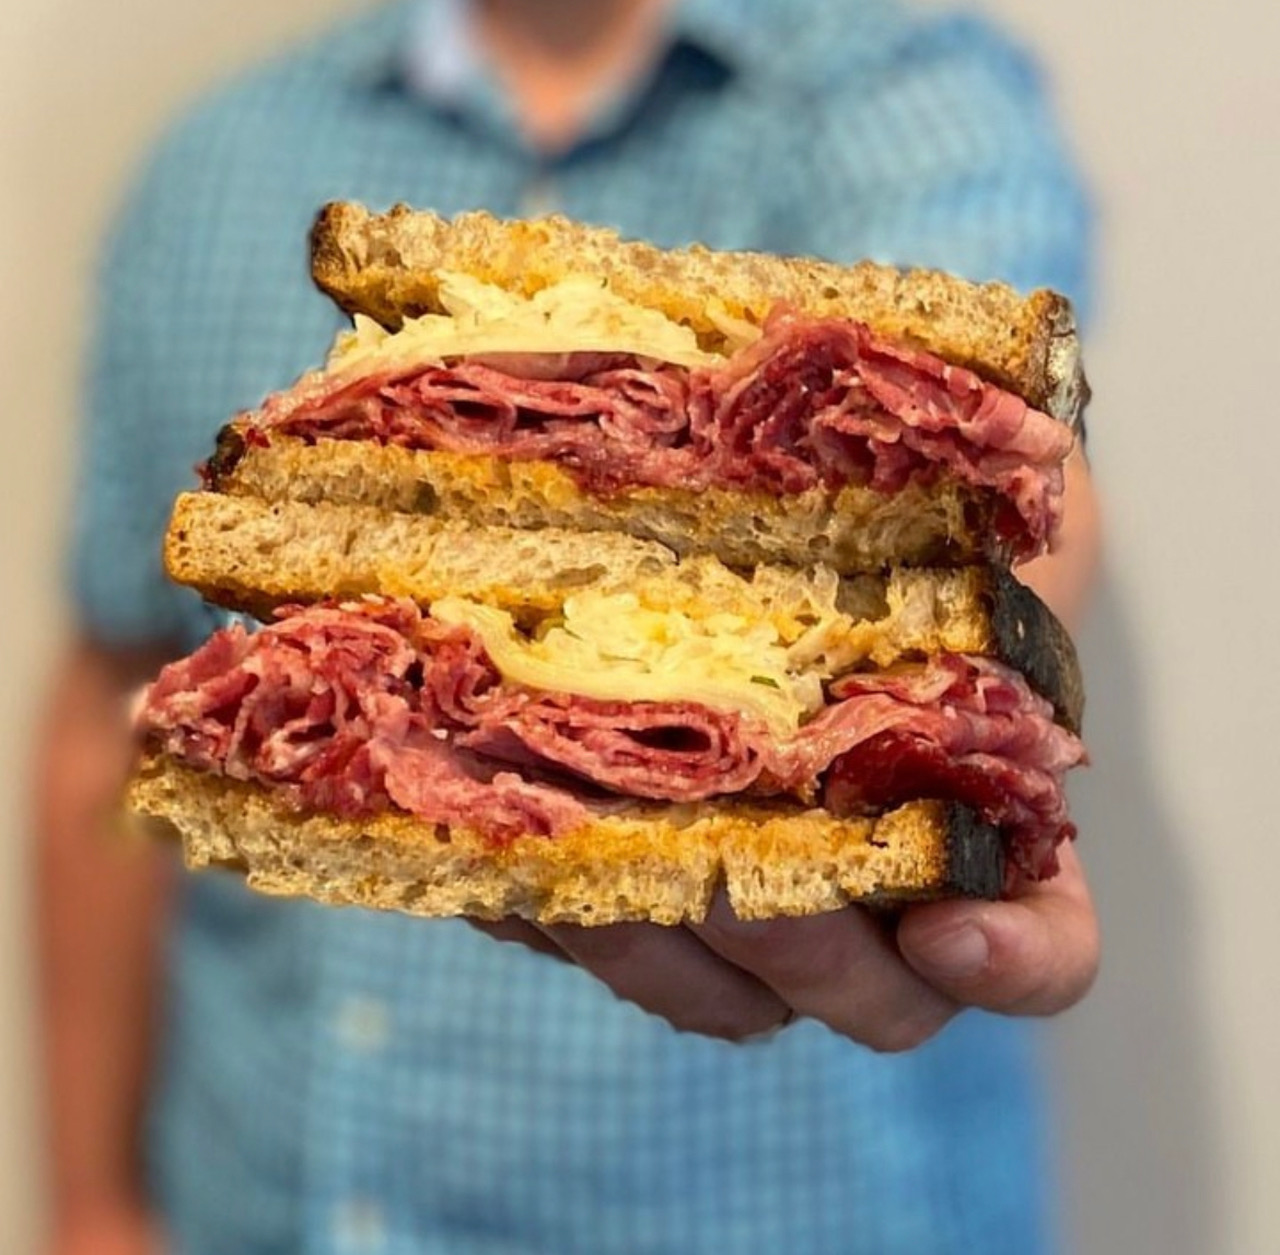 A reuben sandwich is held by a white hand. Photo from Martinelli's Market's Instagram page.